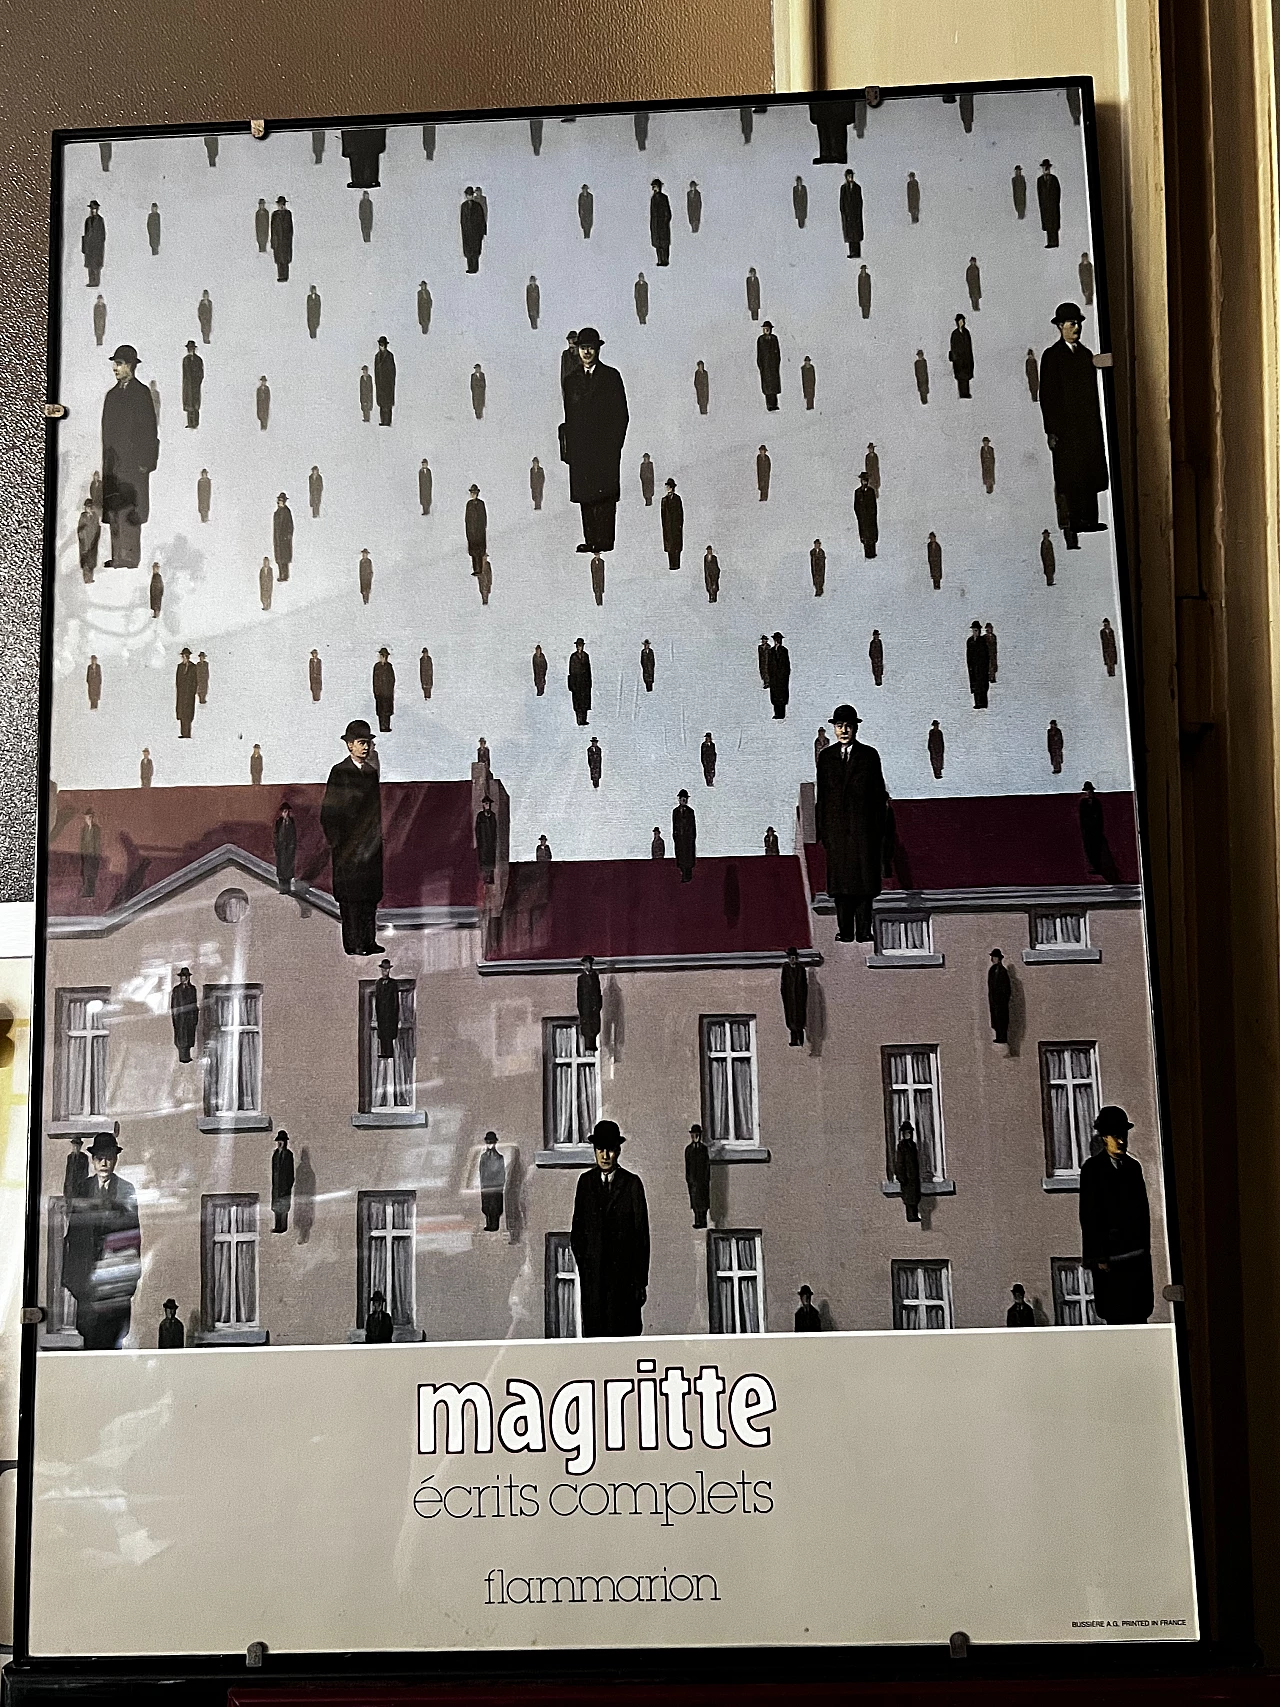 Poster for Magritte écrits complets book by Editions Flammarion, 1990s 2